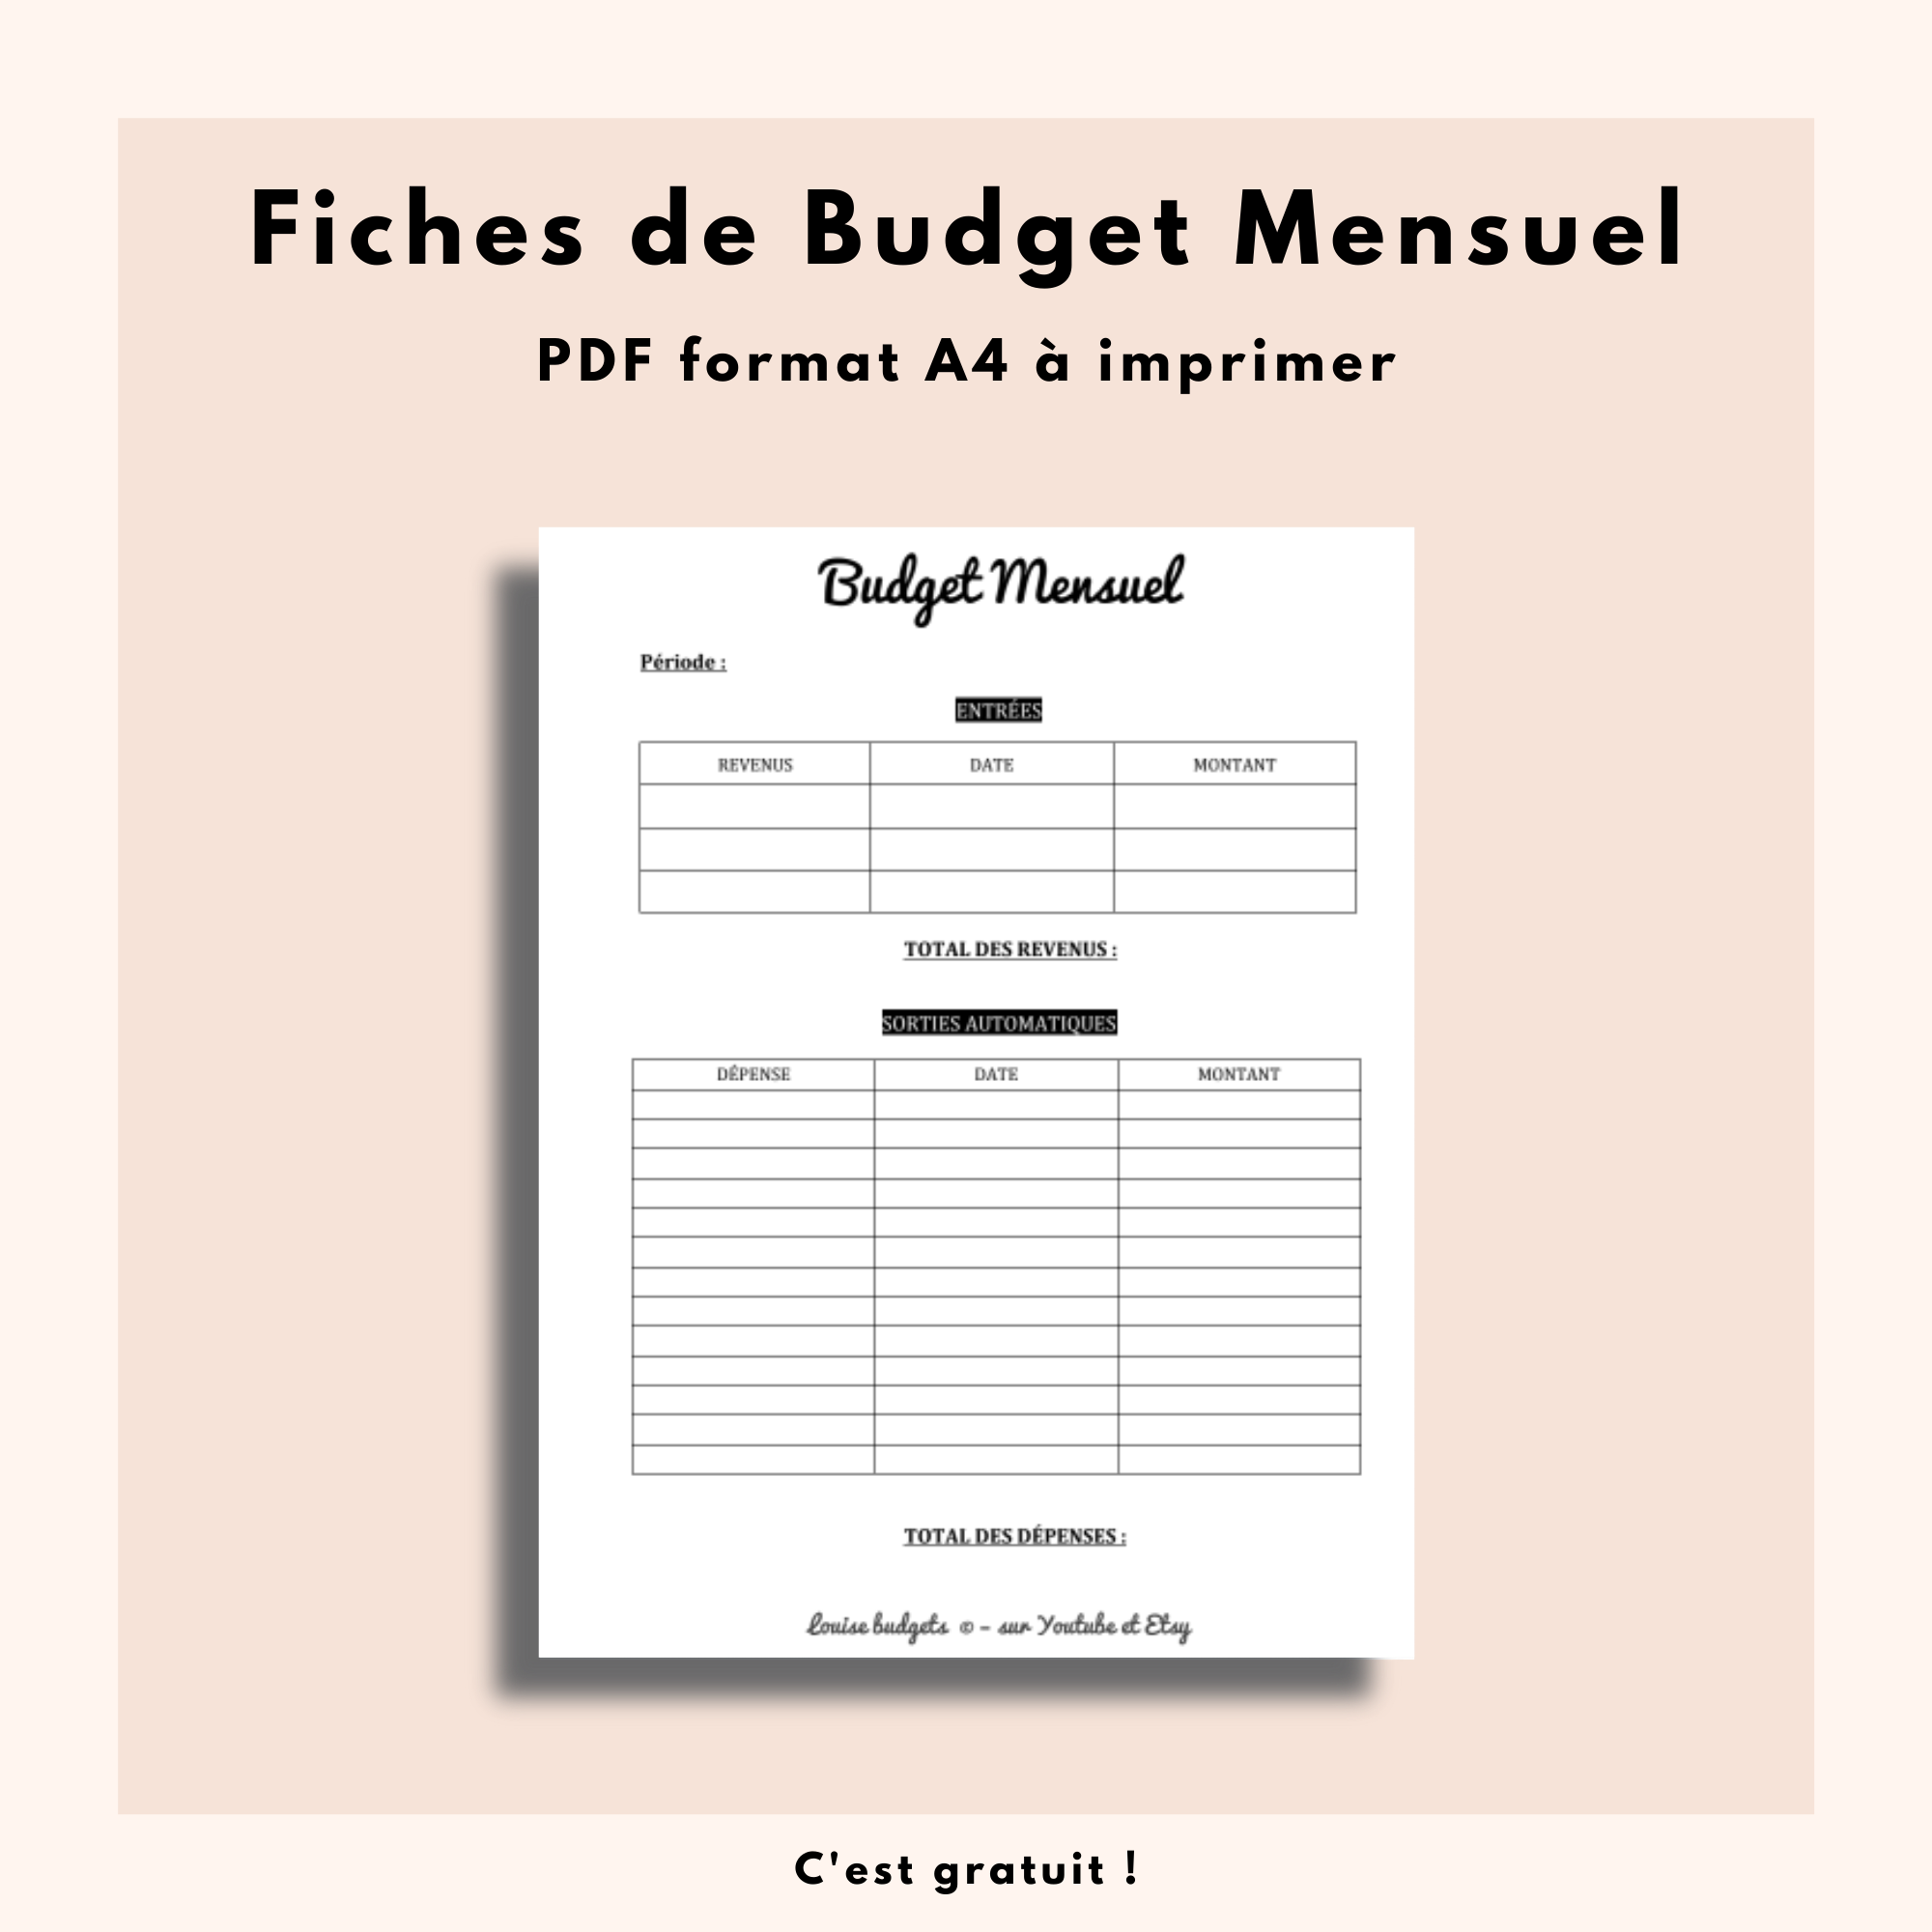 https://formator.io/uploads/page/fiches-budget-mensuel-gratuite-louise-budgets-622ef83c7ccdb.png